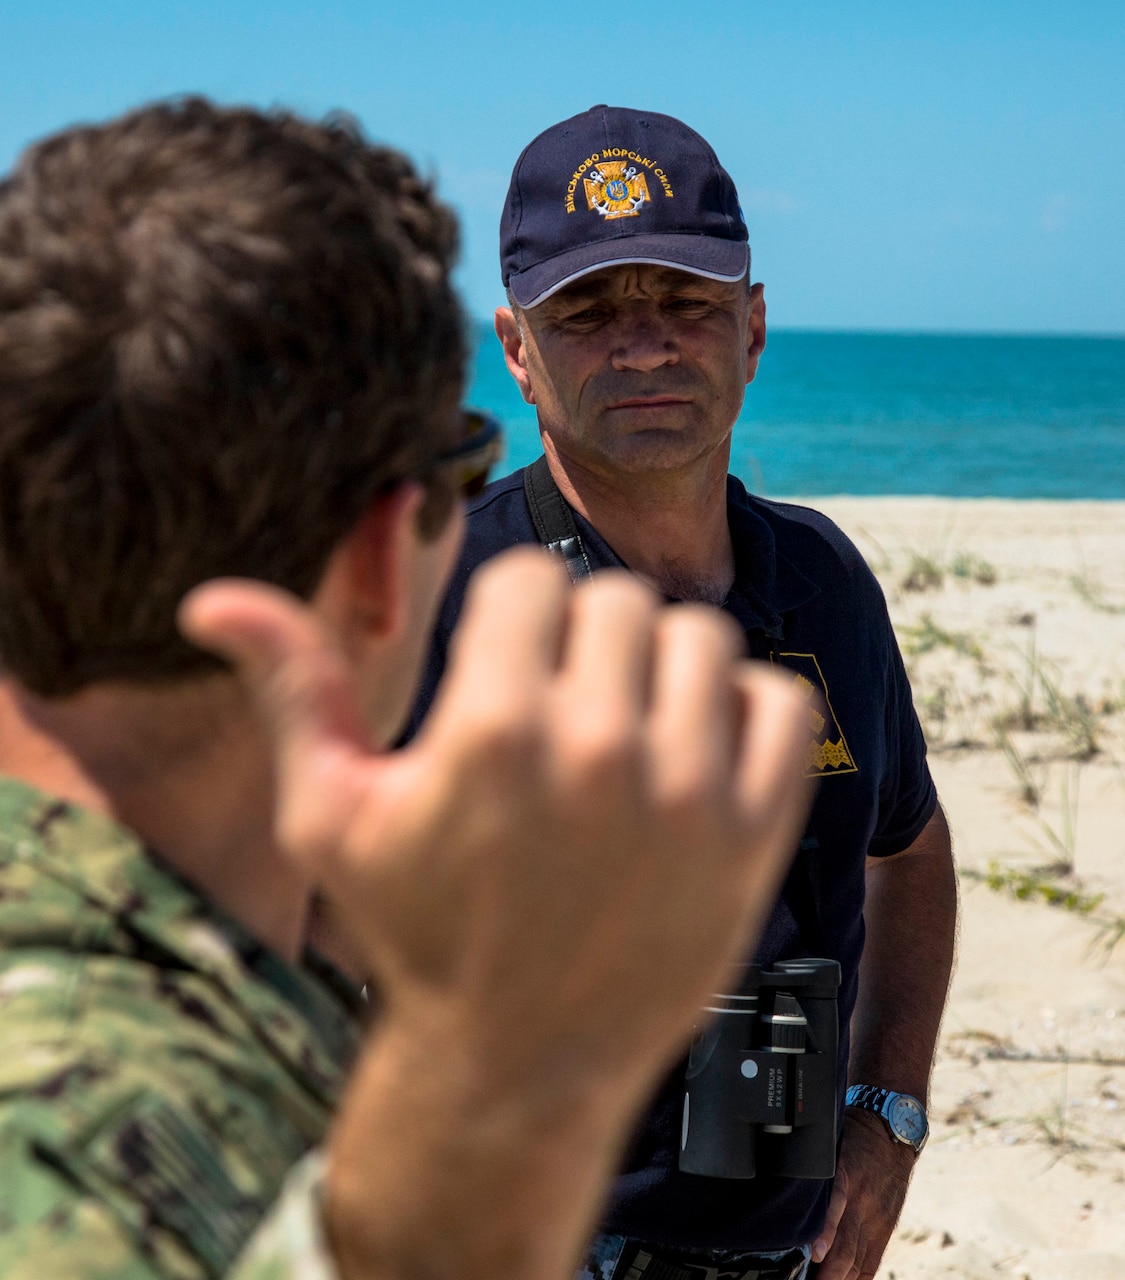 A U.S. Naval Special Warfare Command operator briefs Vice Adm. Ihor Voronchenko, commander of the Ukrainian navy on Tendra Island, Ukraine, at exercise Sea Breeze 17, July 19, 2017. Special Operations Command Europe photo by Army Spc. Jeffery Lopez